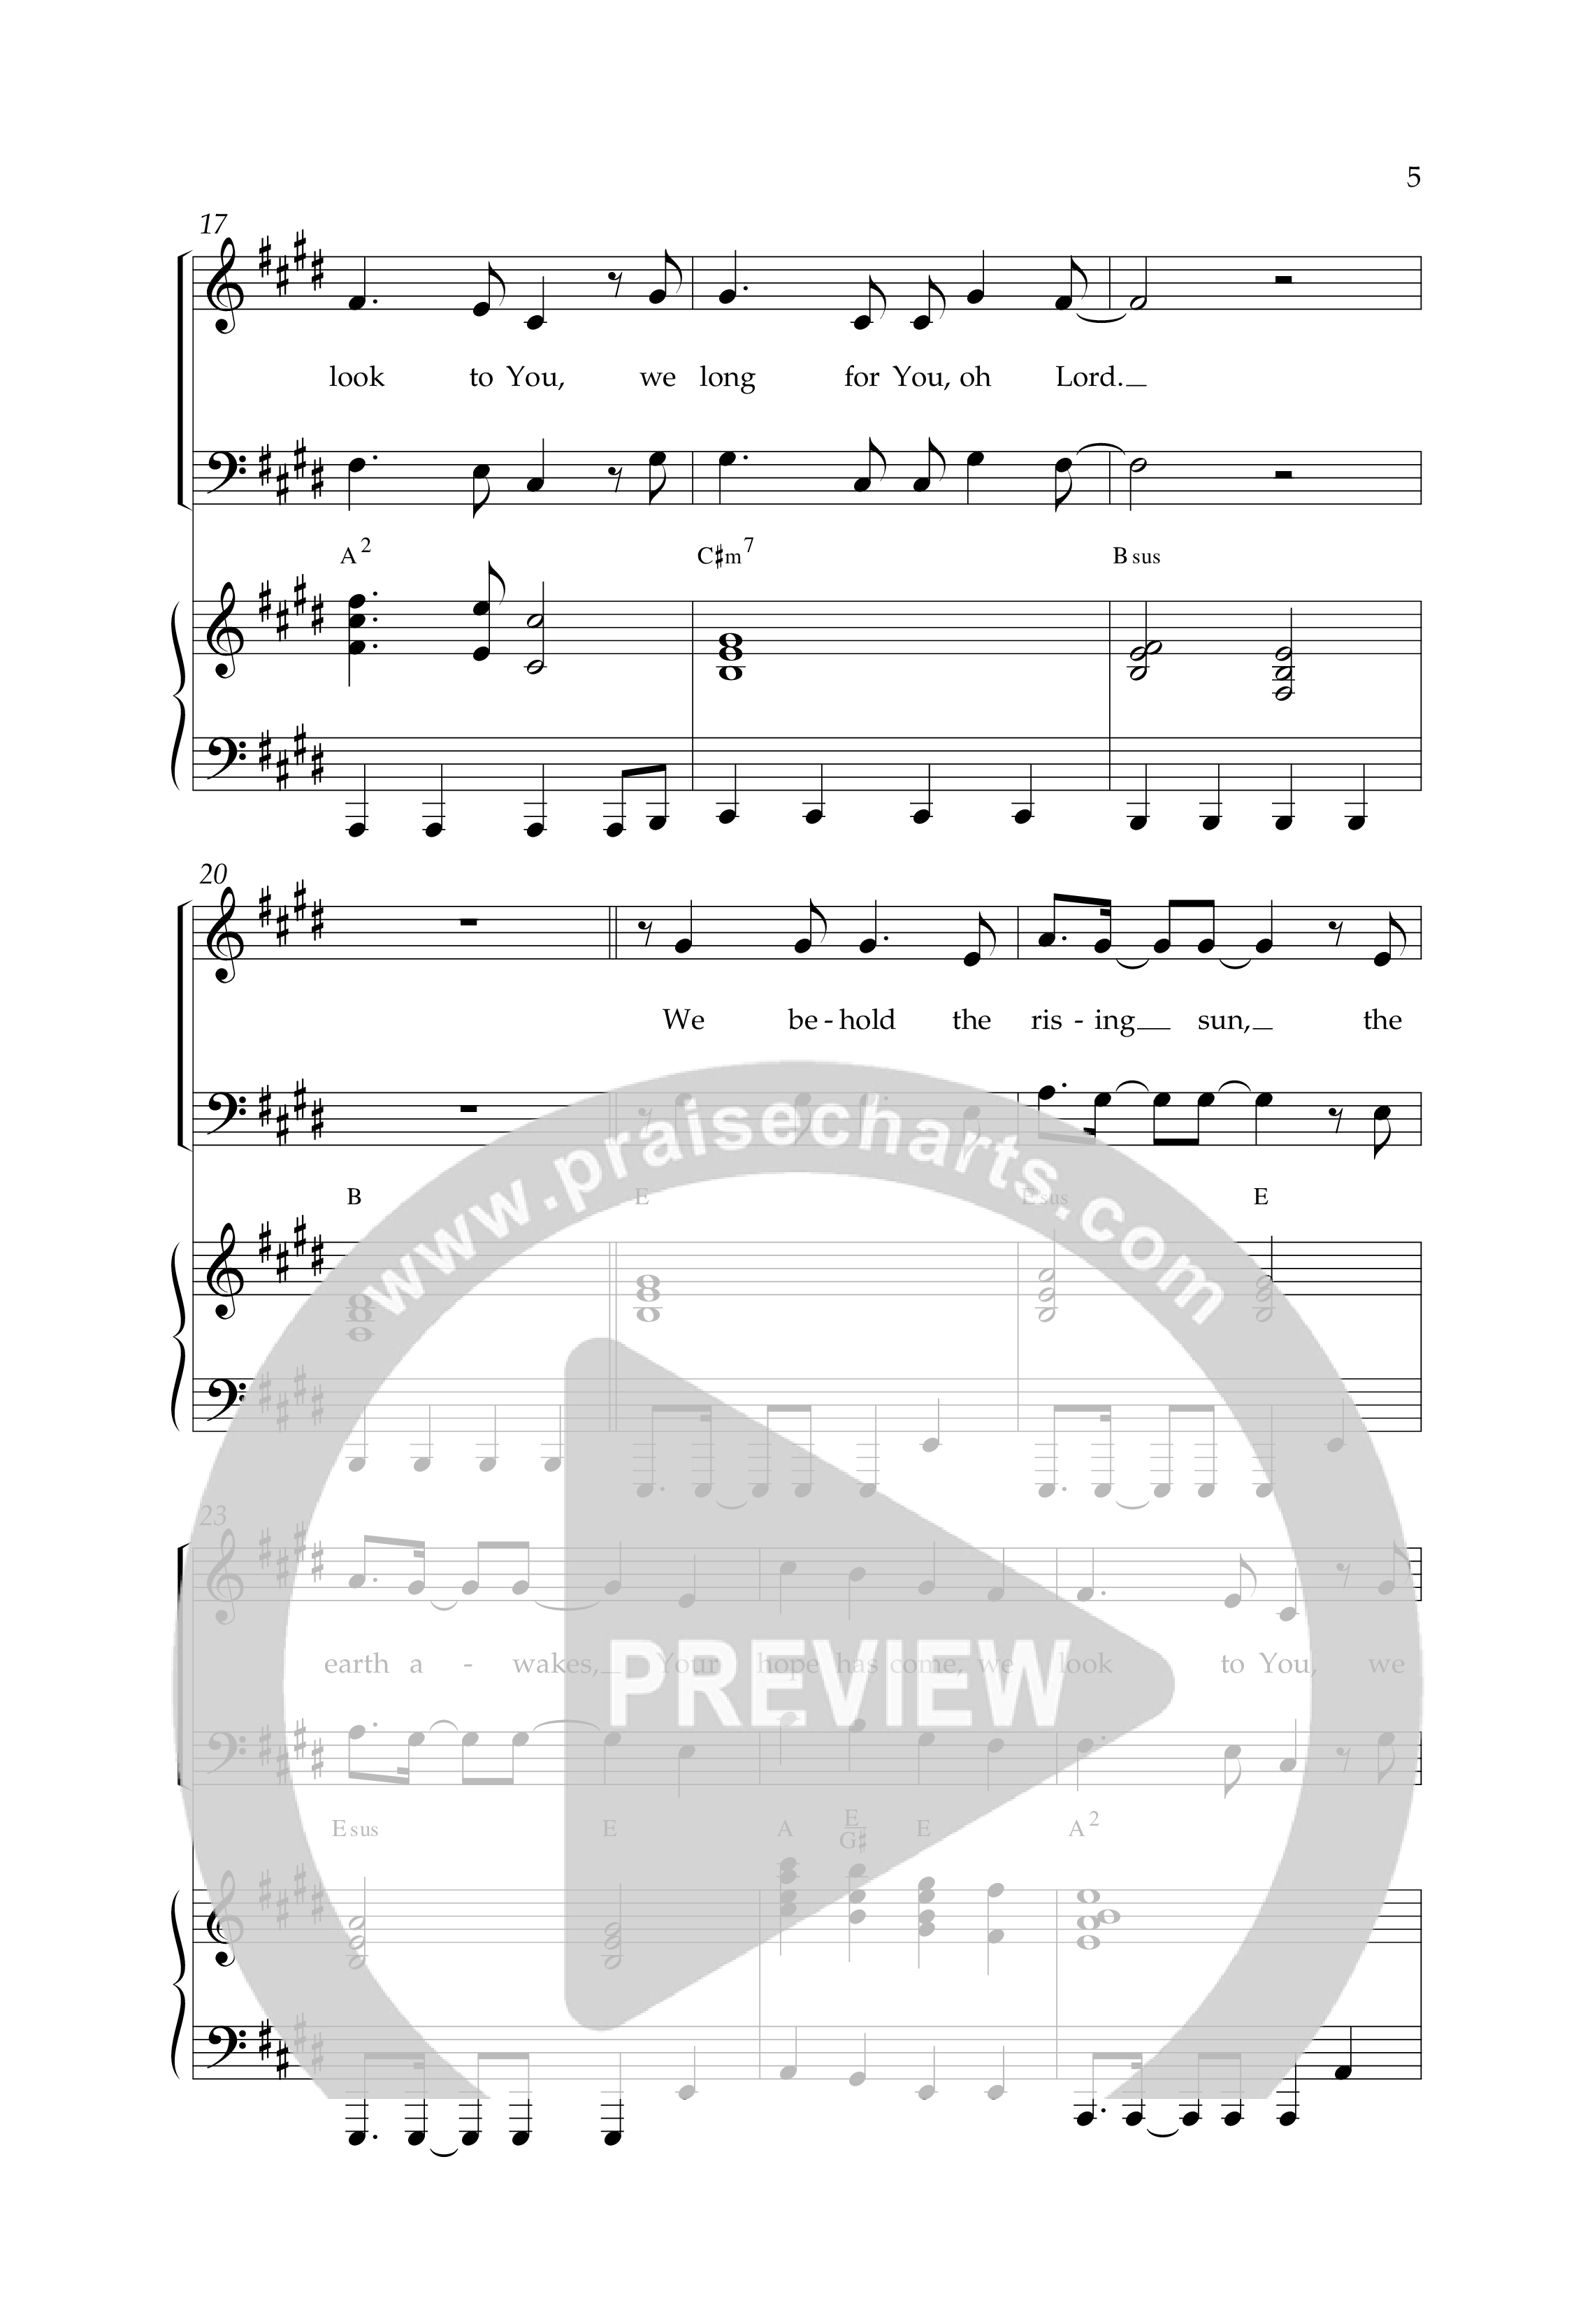 Oh Our Lord (Choral Anthem SATB) Anthem (SATB/Piano) (Lifeway Choral / Arr. Joshua Spacht)